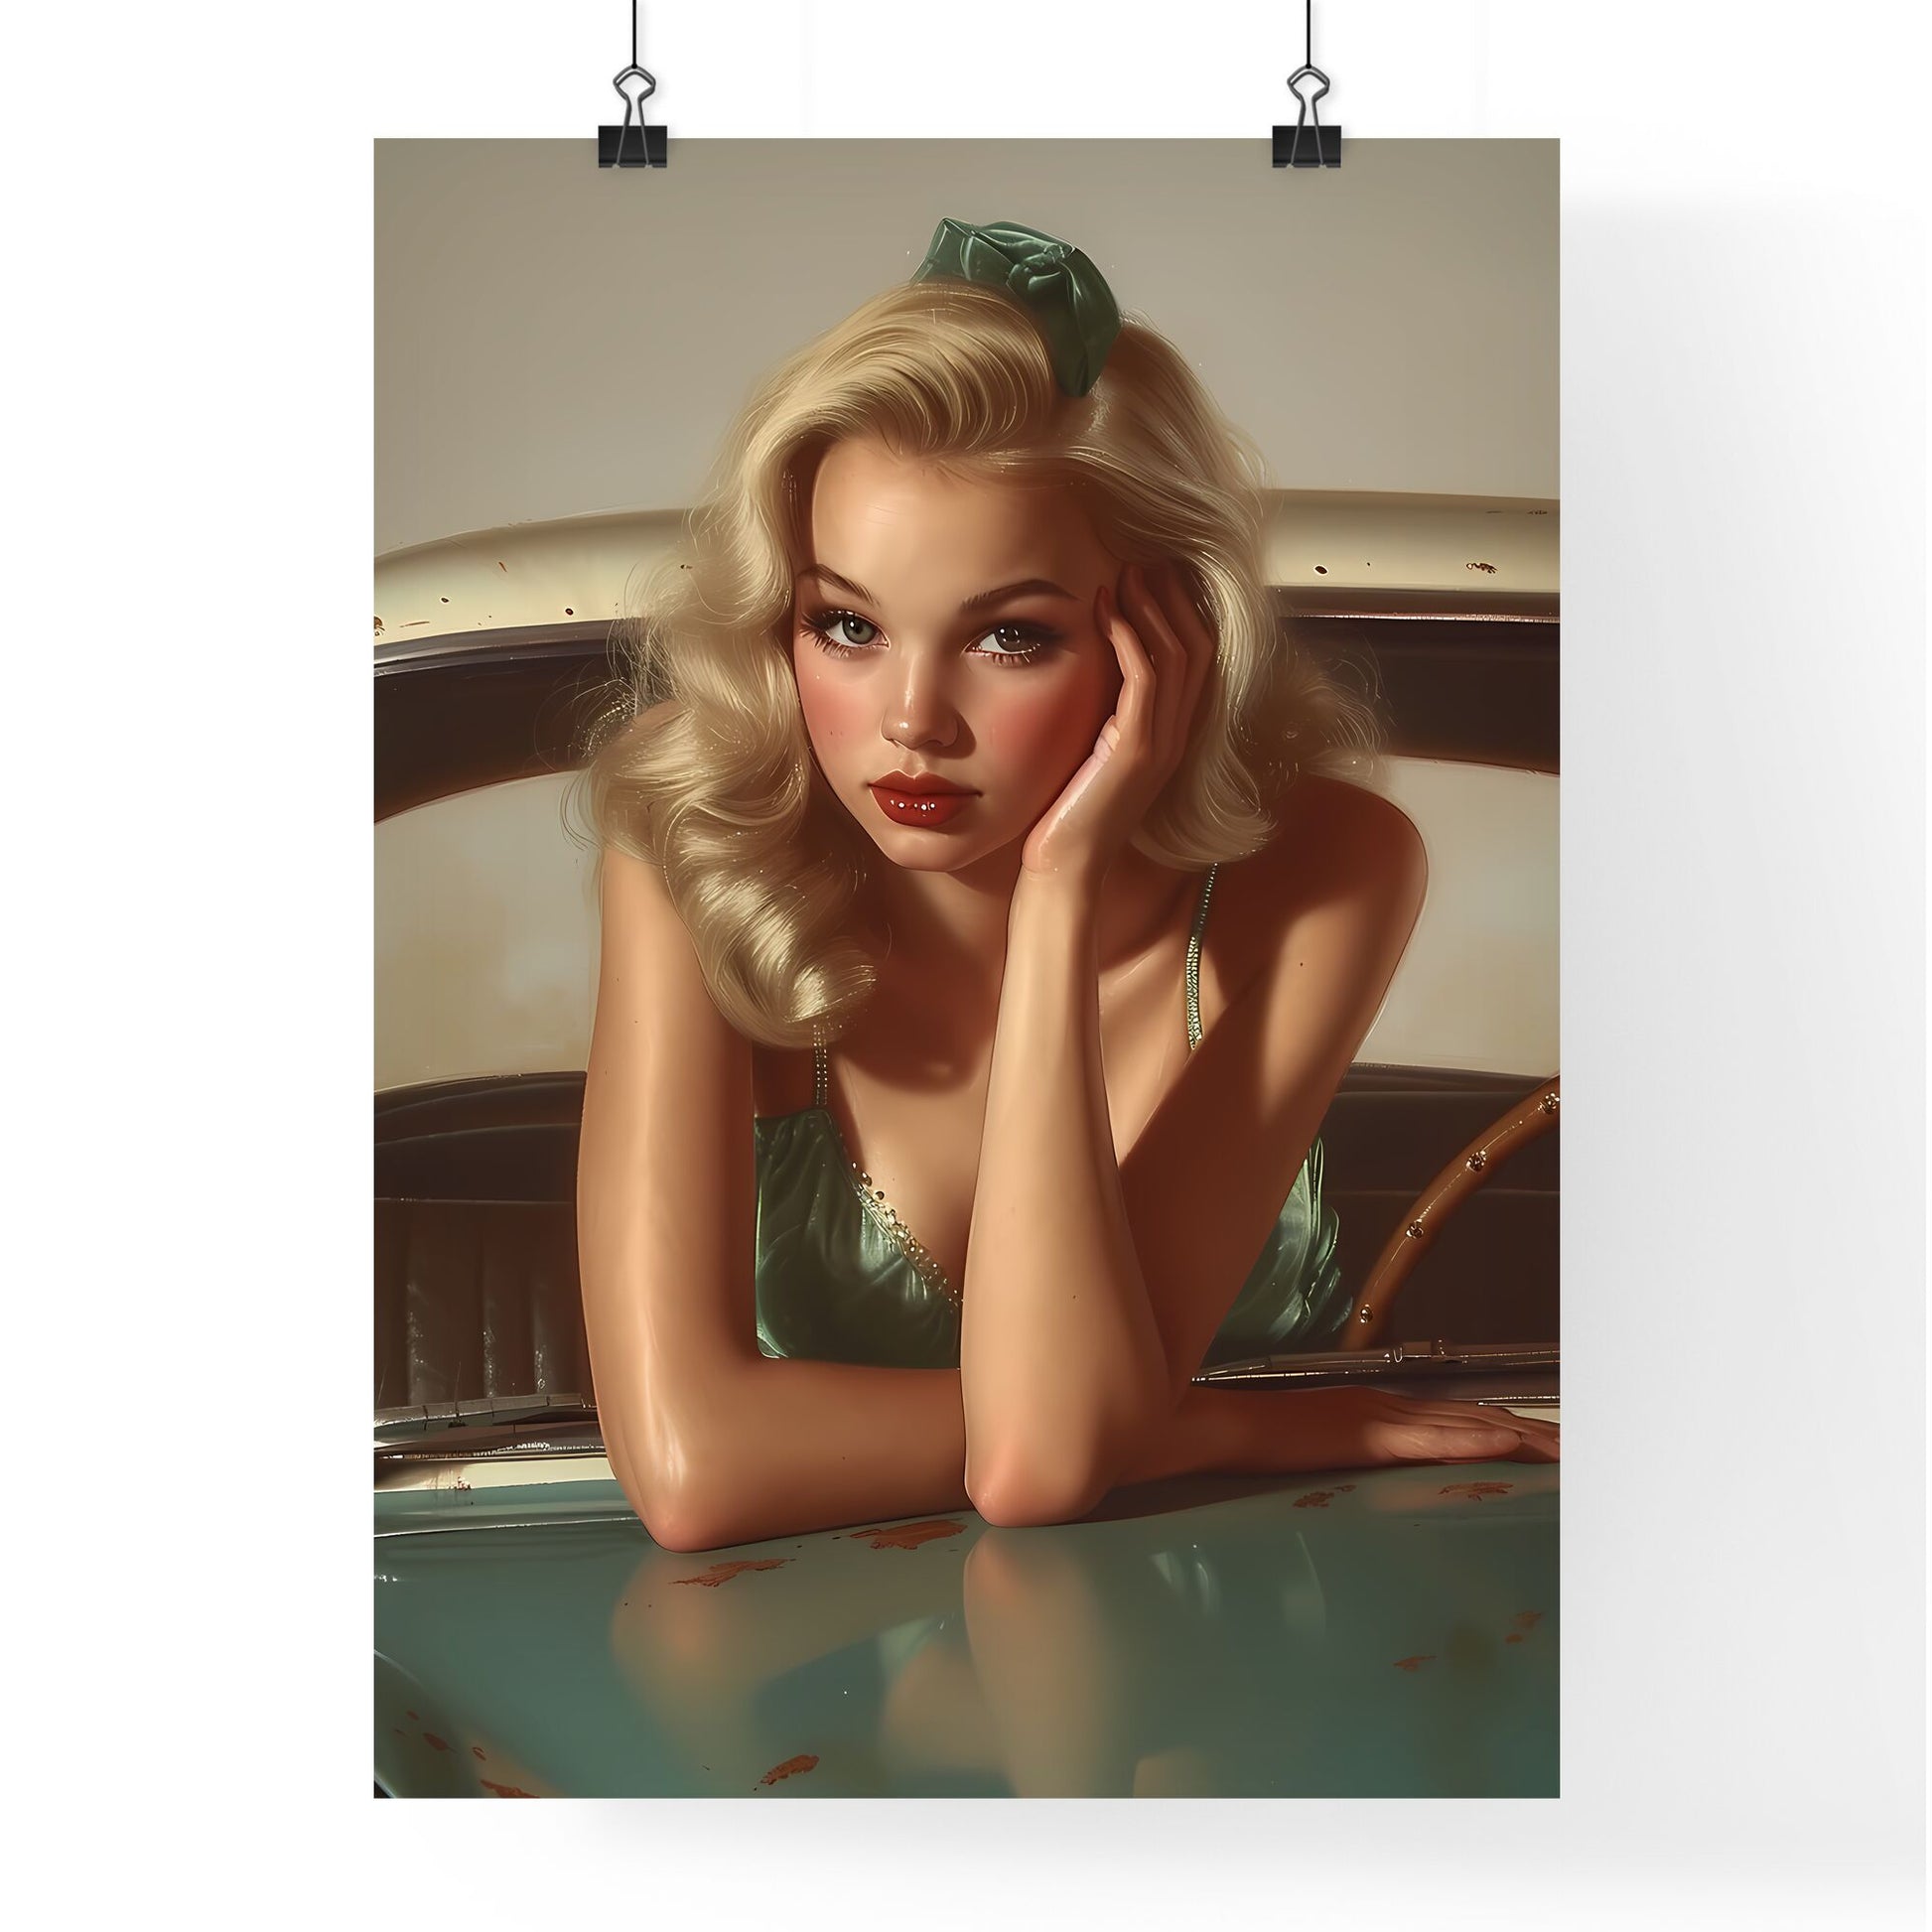 The vintage pin up girl leaning on a car - Art print of a woman sitting at a table Default Title